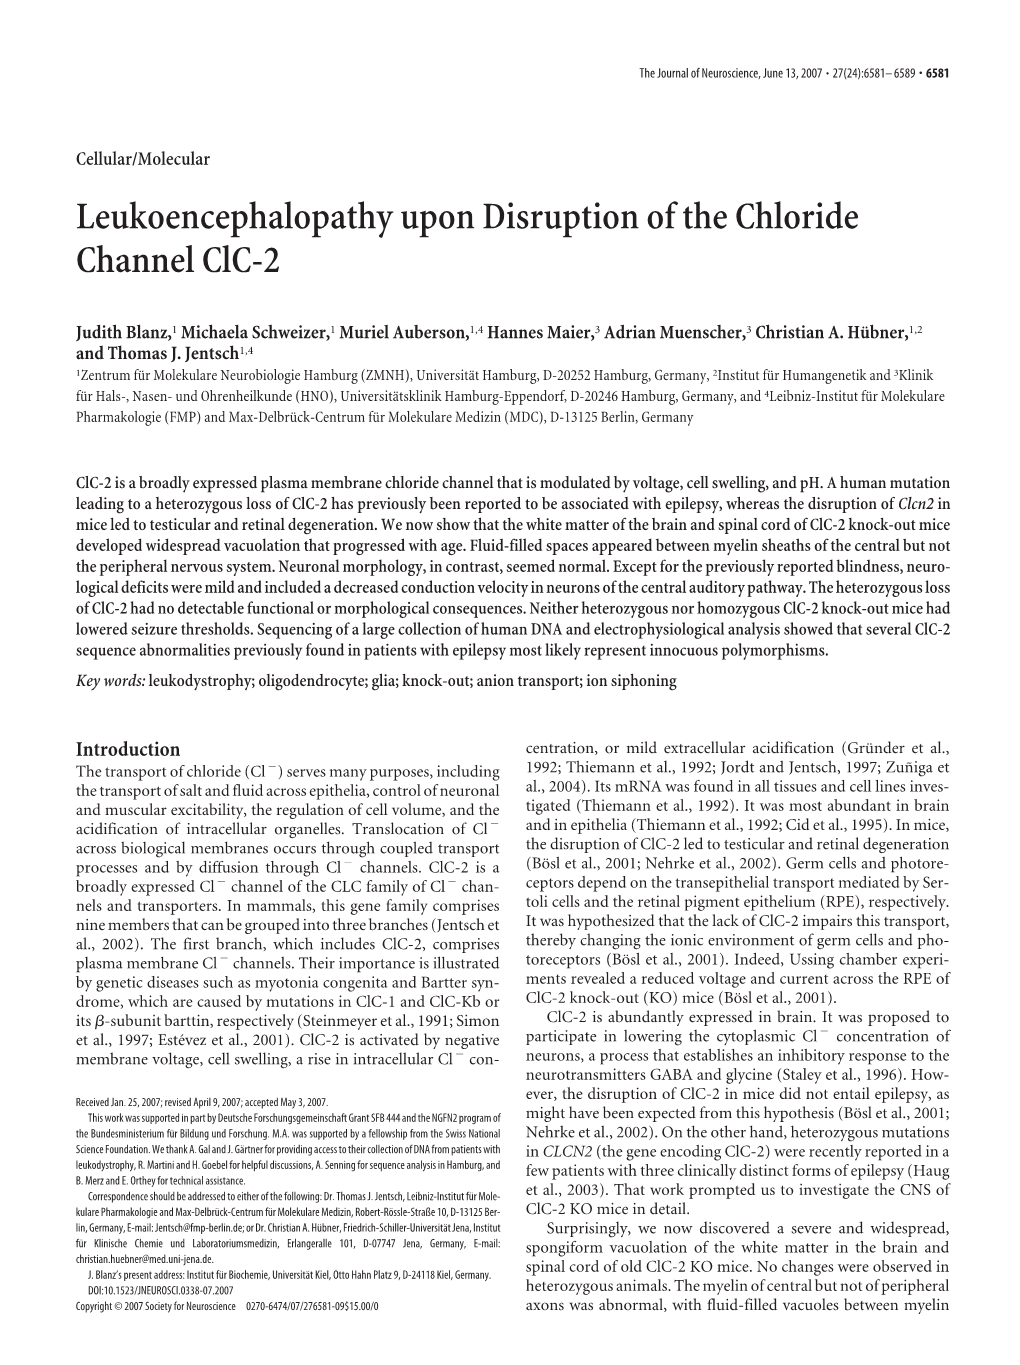 Leukoencephalopathy Upon Disruption of the Chloride Channel Clc-2